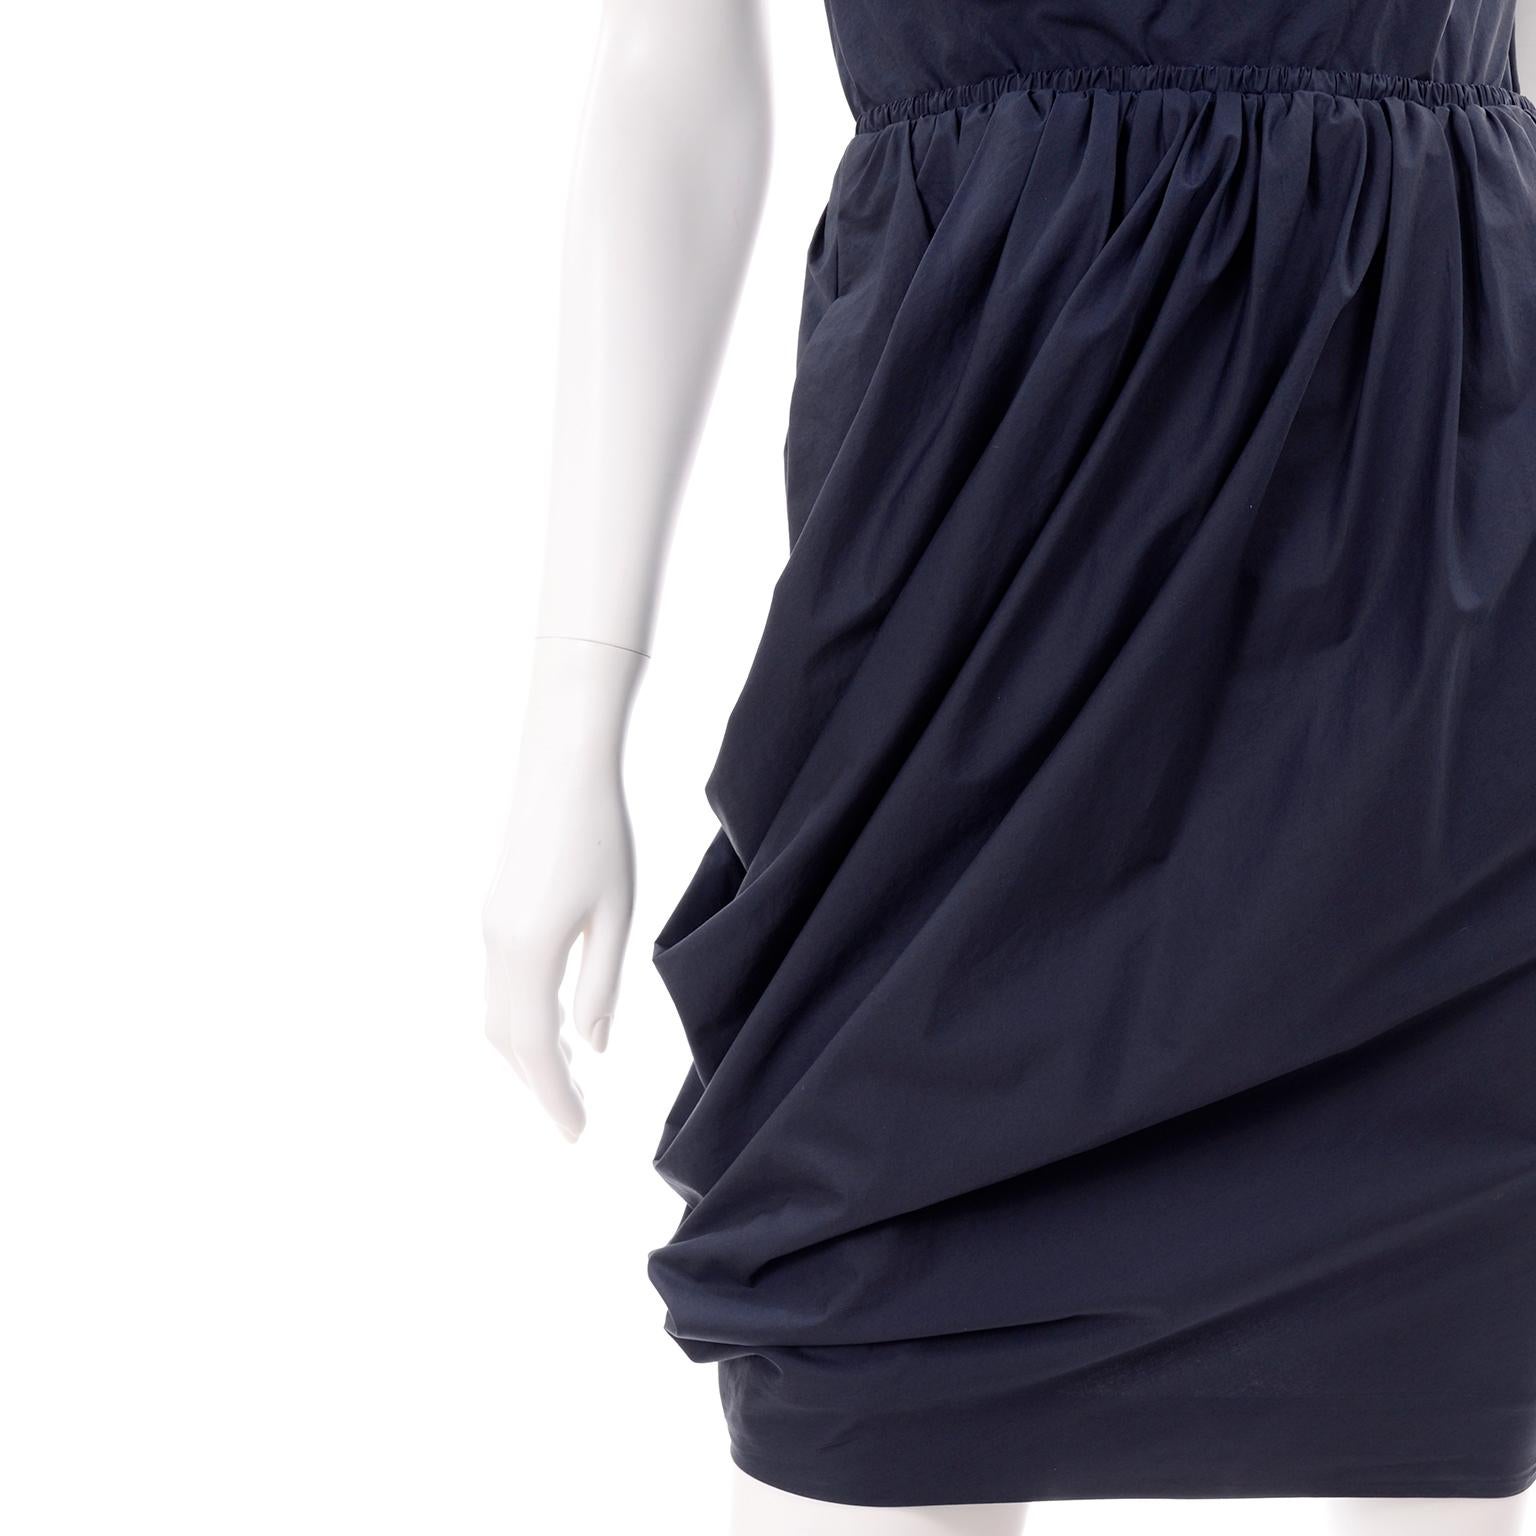 Navy Blue Cotton Carven Dress With Ruching Pockets & Open Back For Sale 3